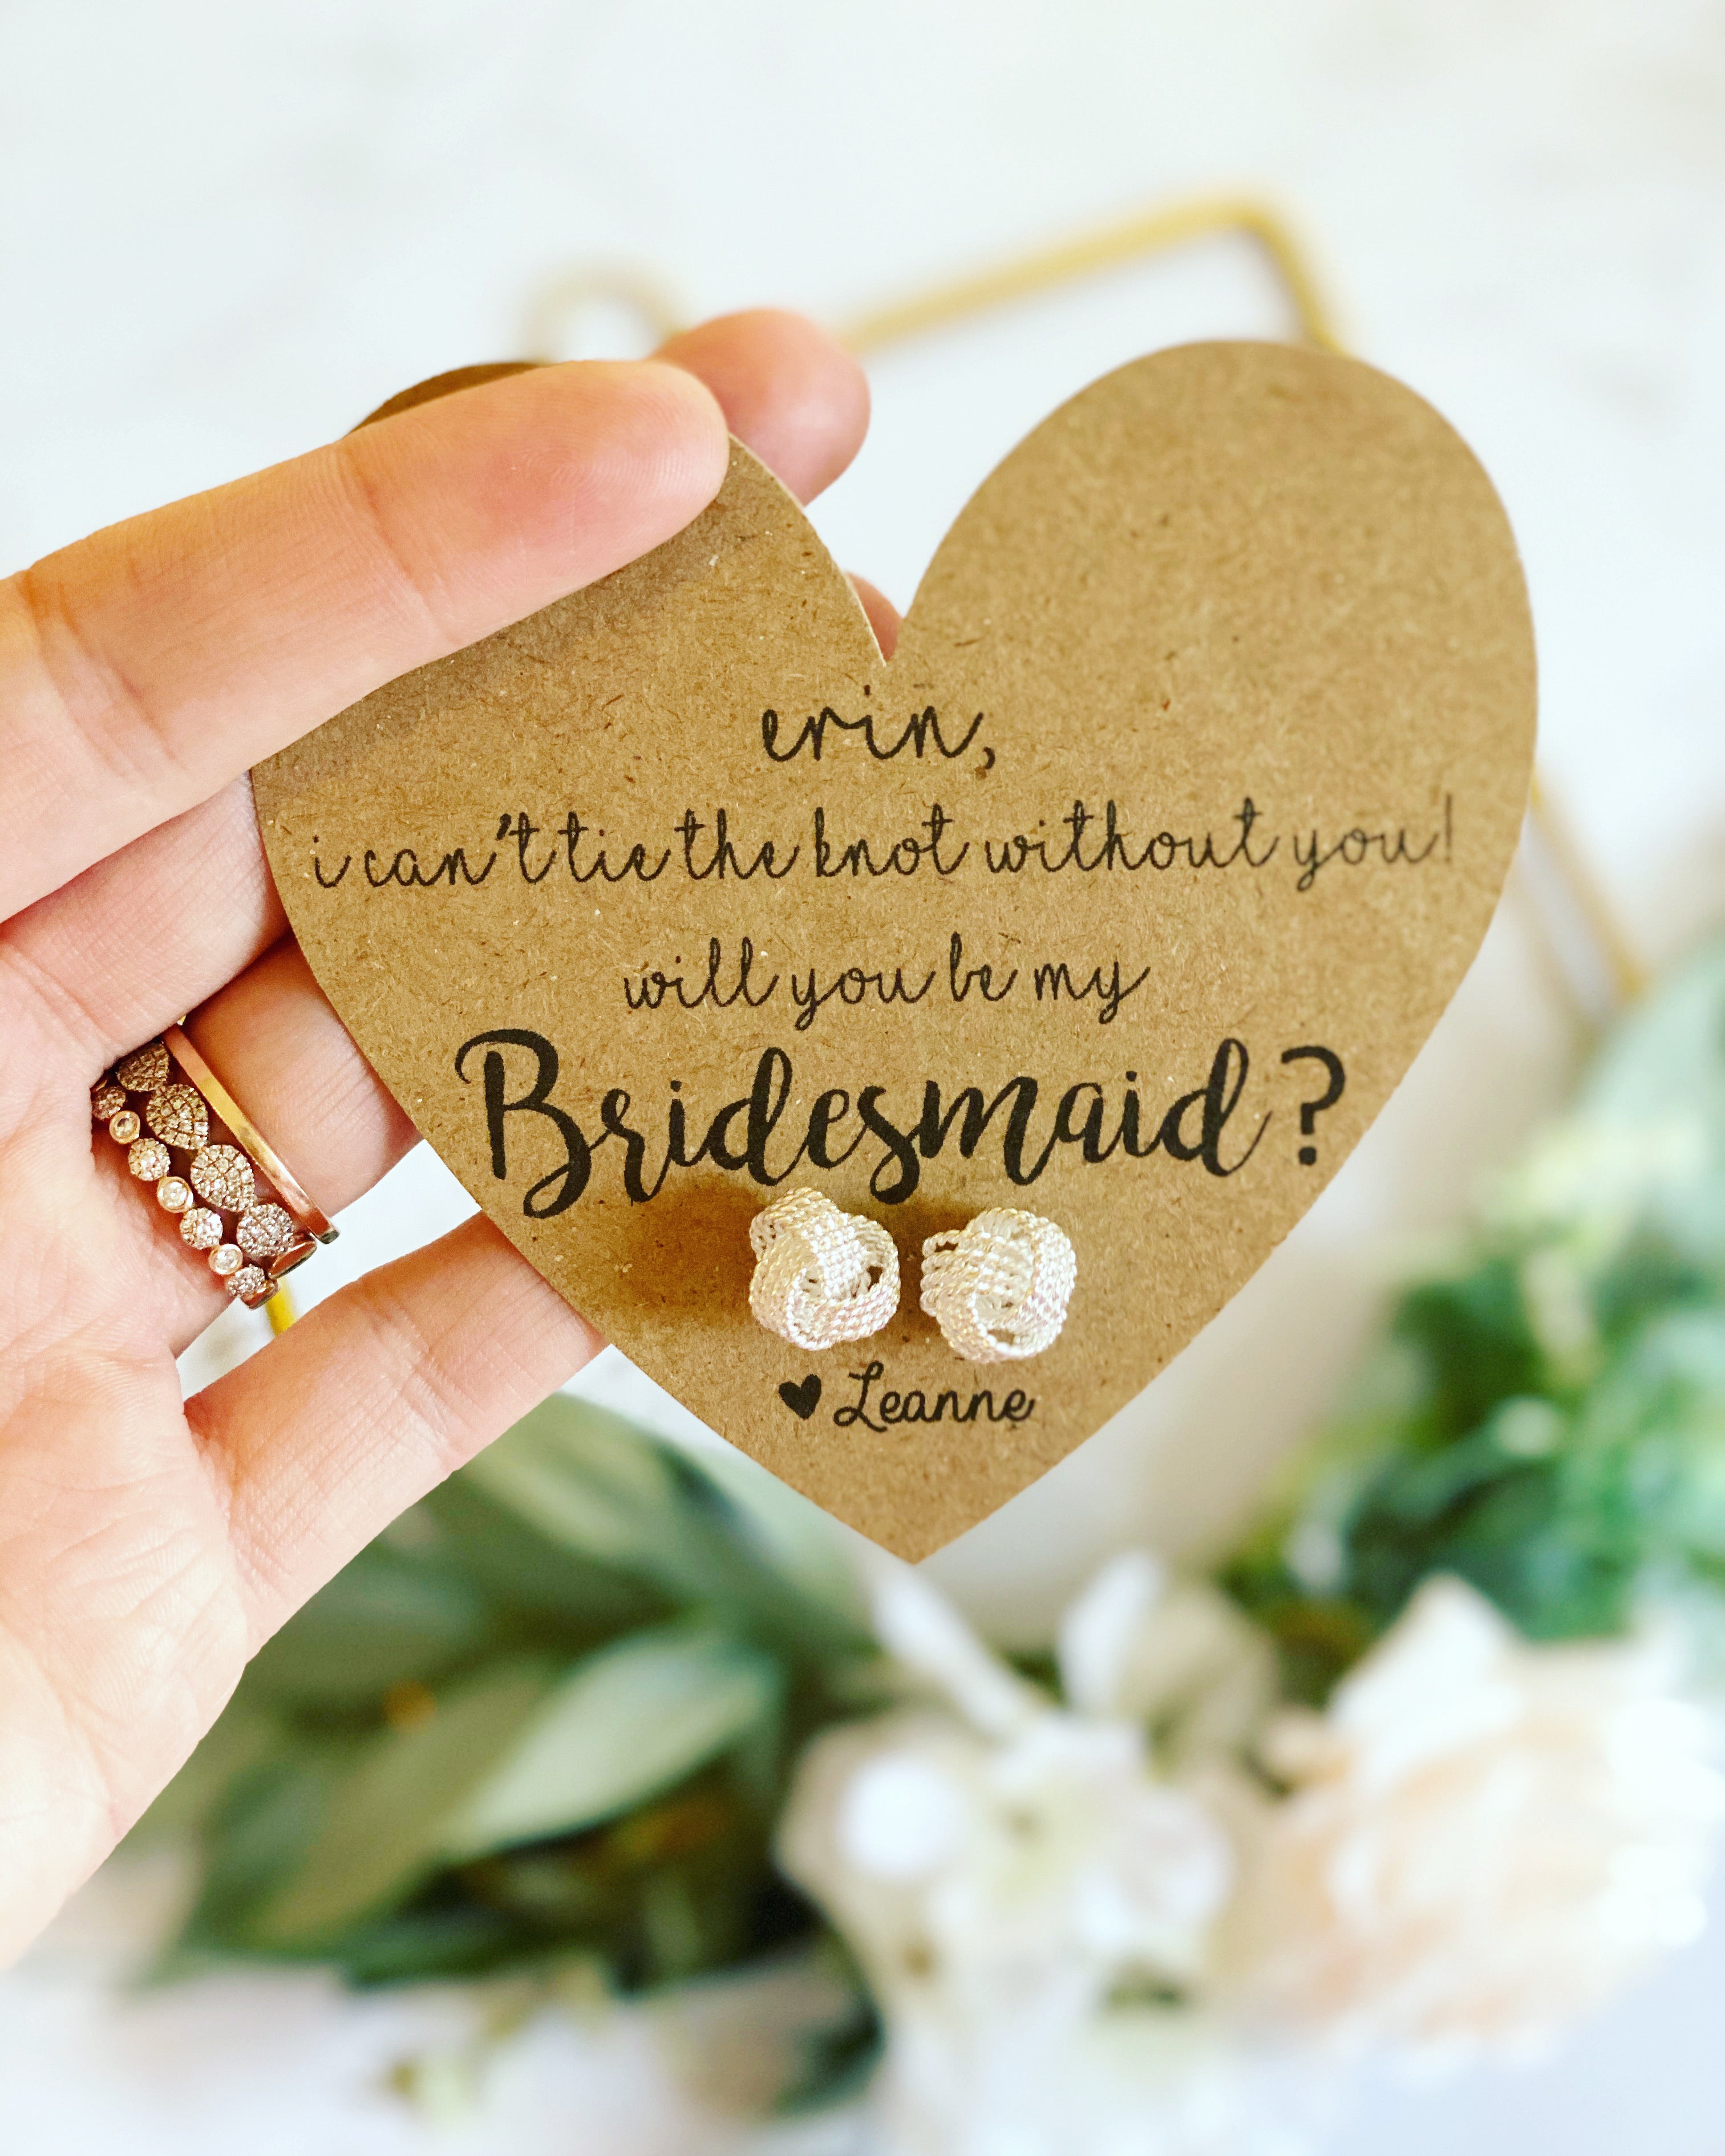 Bride-To-Be Seeks Bridesmaid Gift Advice From Women Who Already Tied the  Knot in an Attempt to Be Practical and Gift Savvy on Her Big Day -  CheezCake - Parenting | Relationships |